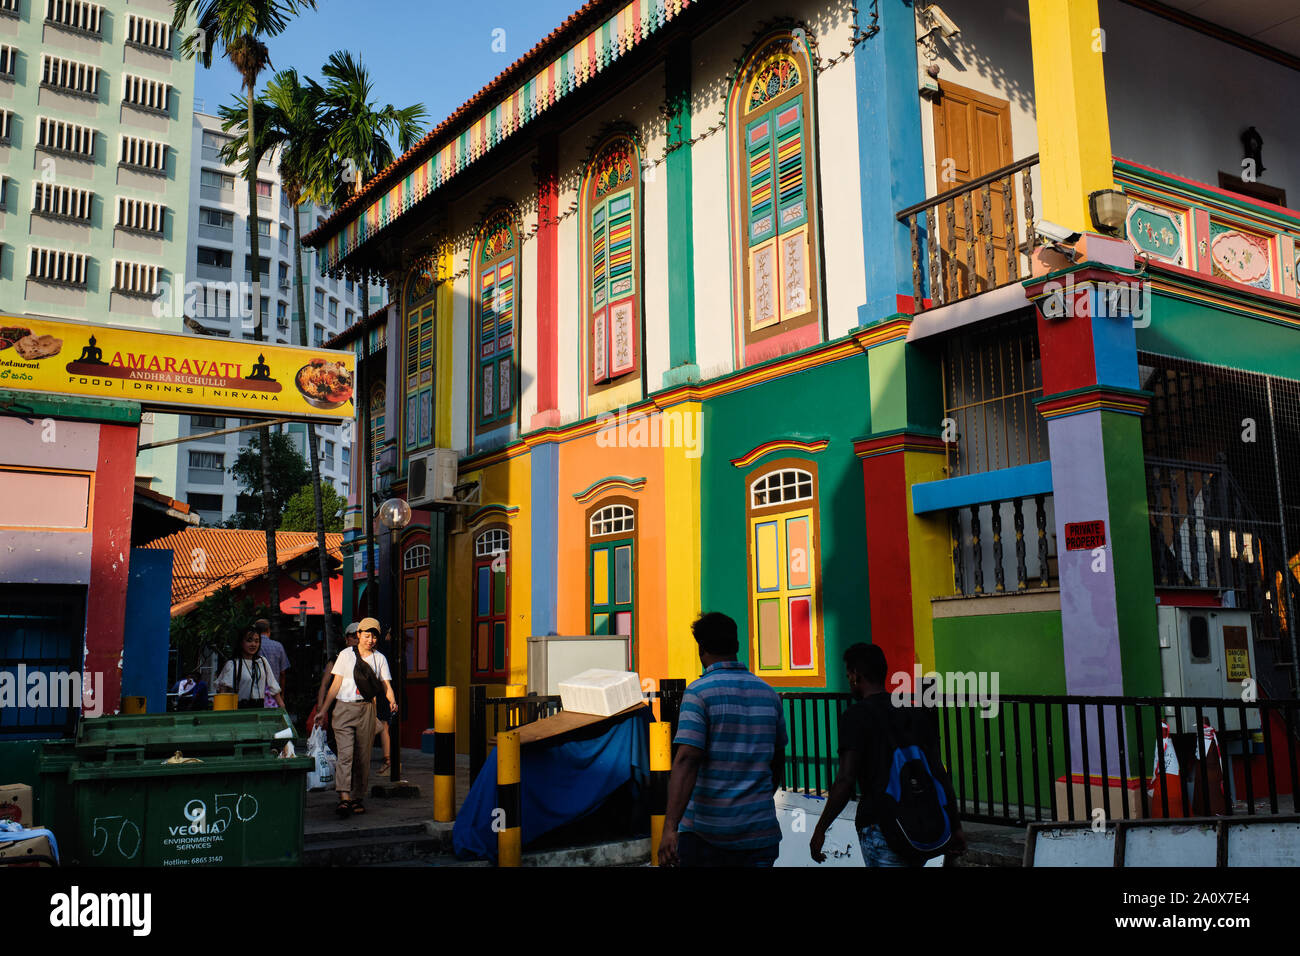 The colorful house of Tang Teng Niah, the former residence of a Chinese entrepreneur in Indian-dominated Little India area, Singapore Stock Photo